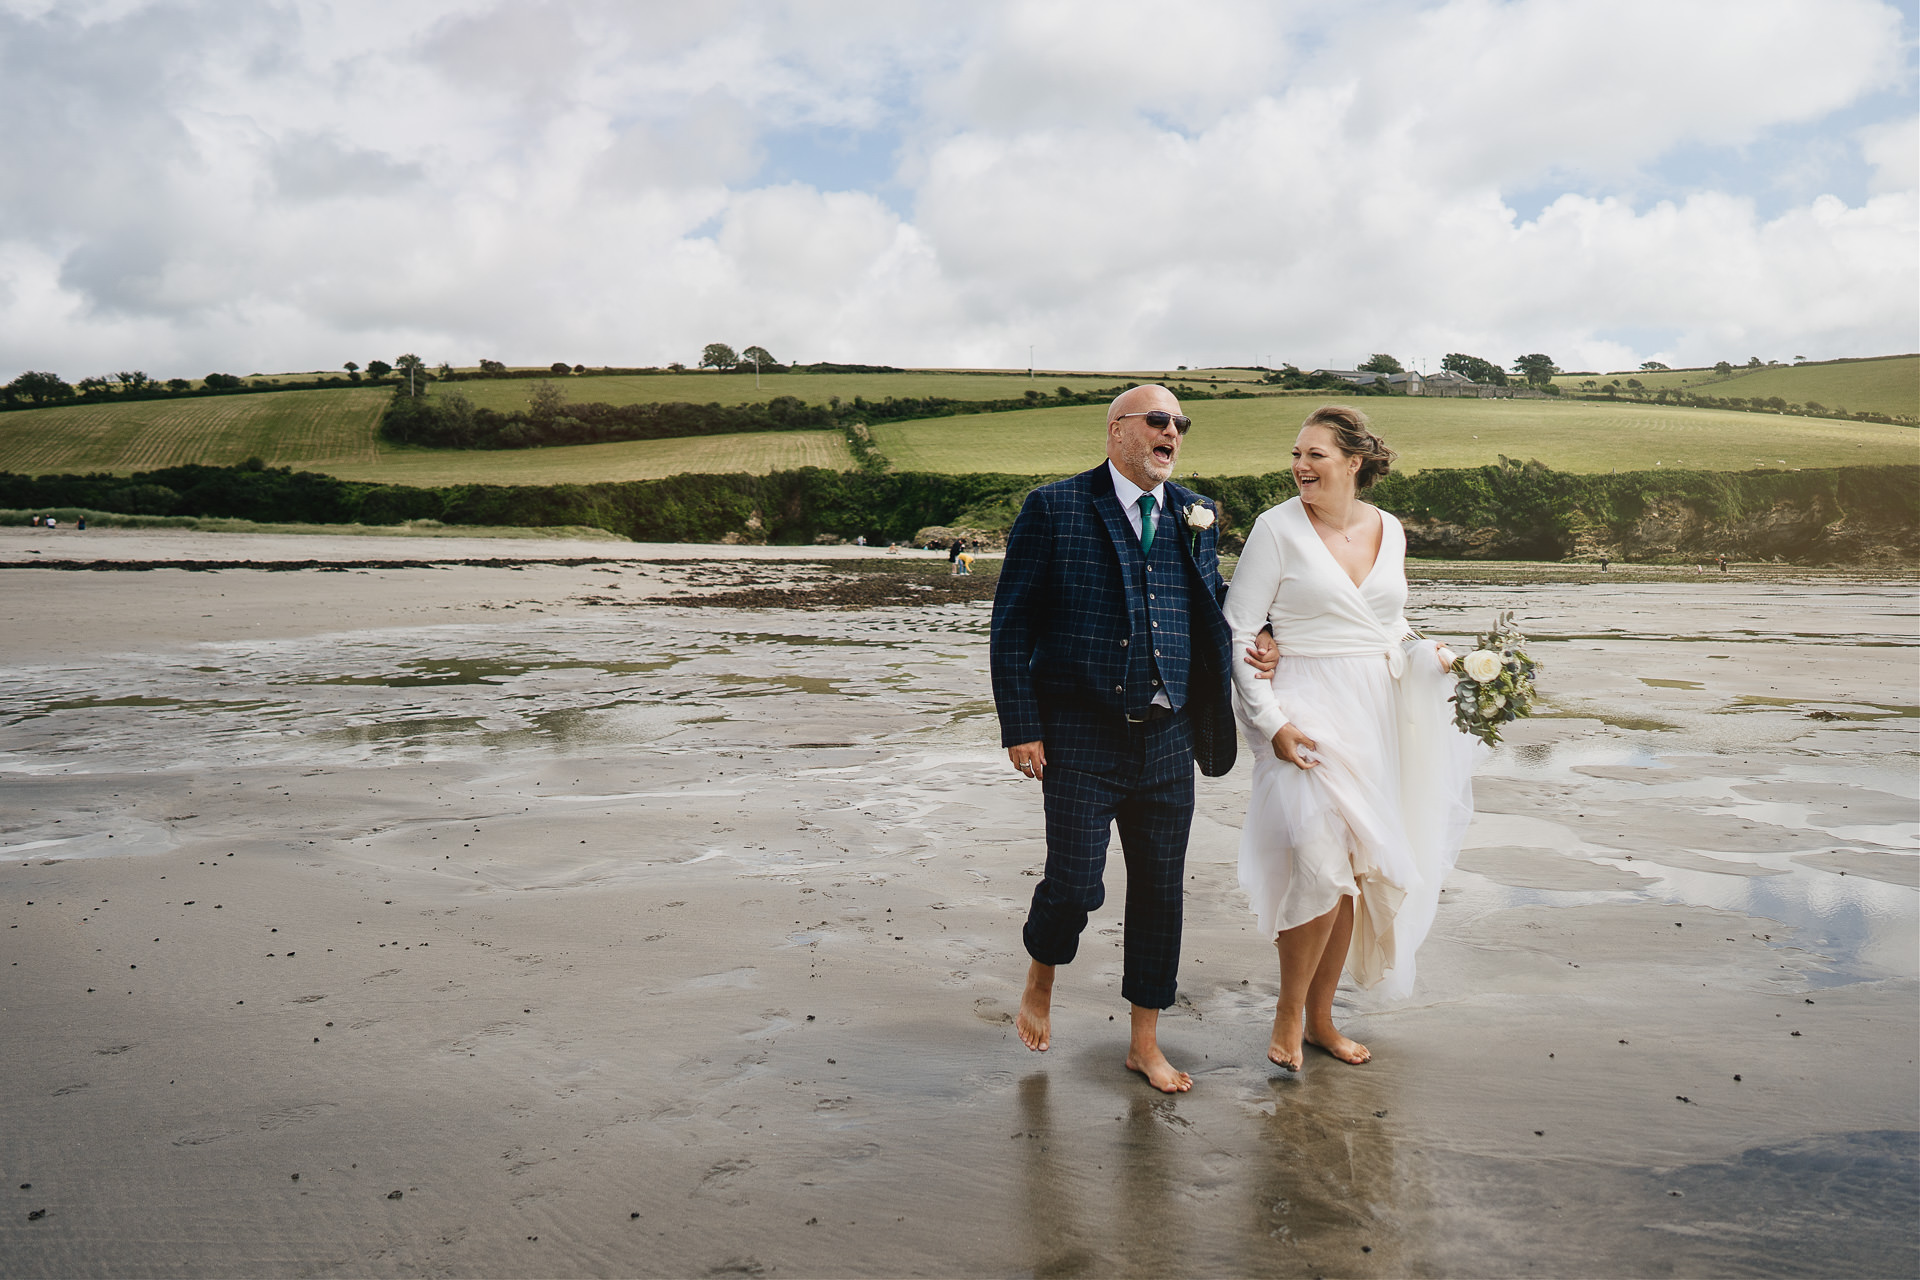 A bride and groom walking and laughing on a Cornish beach